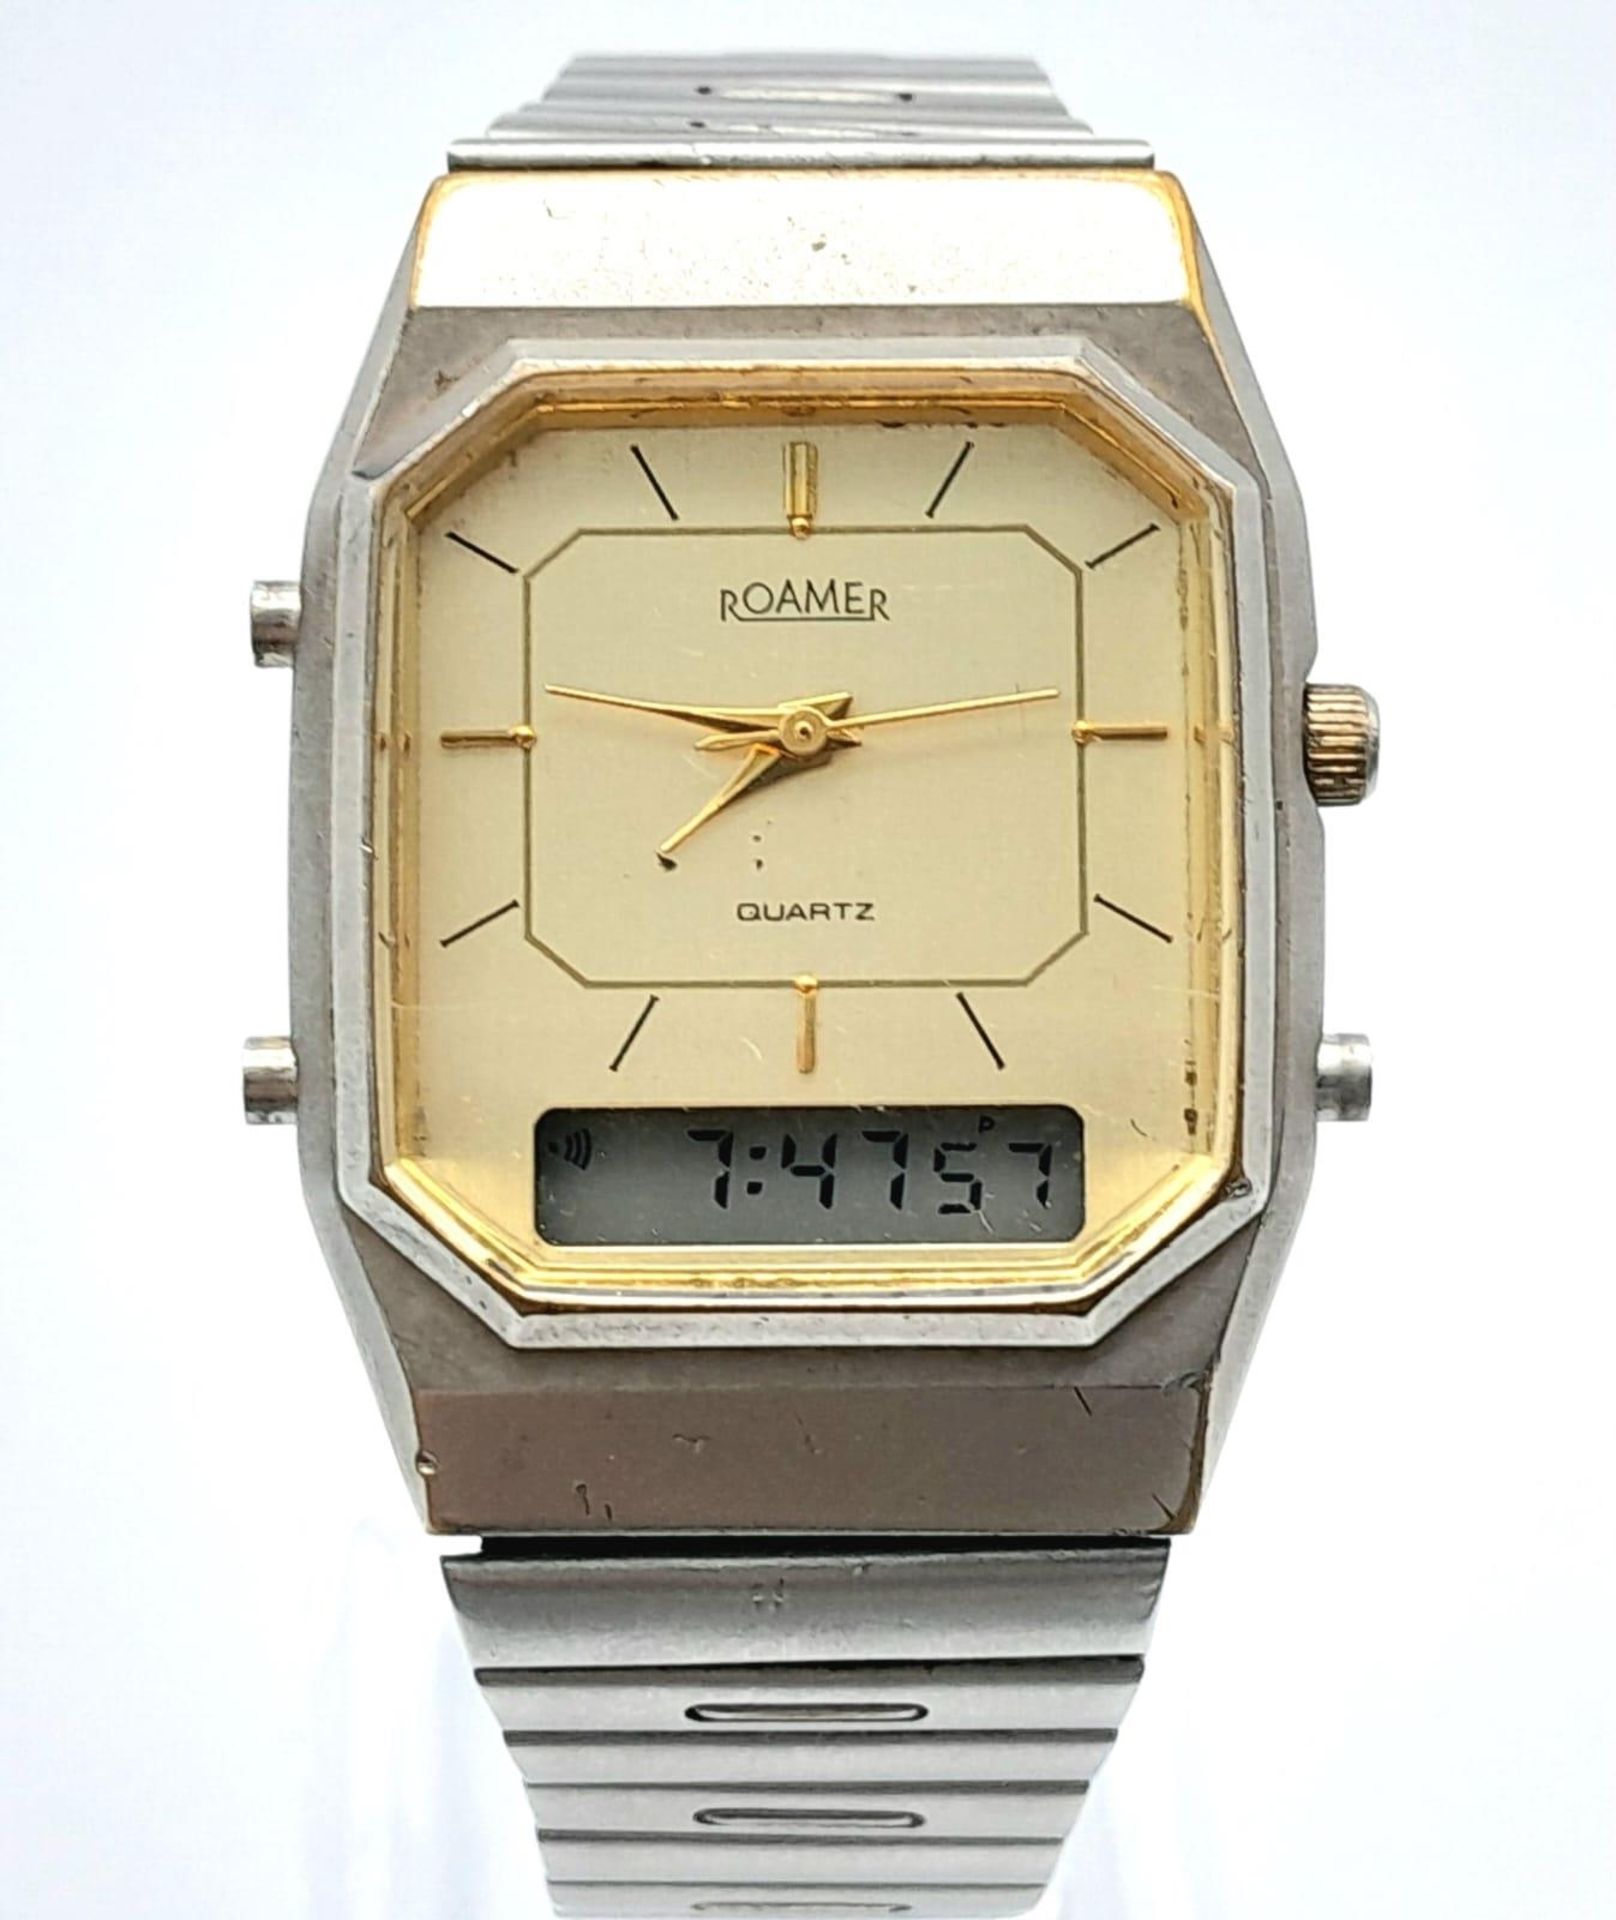 A Rare Vintage Roamer Digital and Analogue Watch. Stainless steel strap and octagonal case - 29mm.